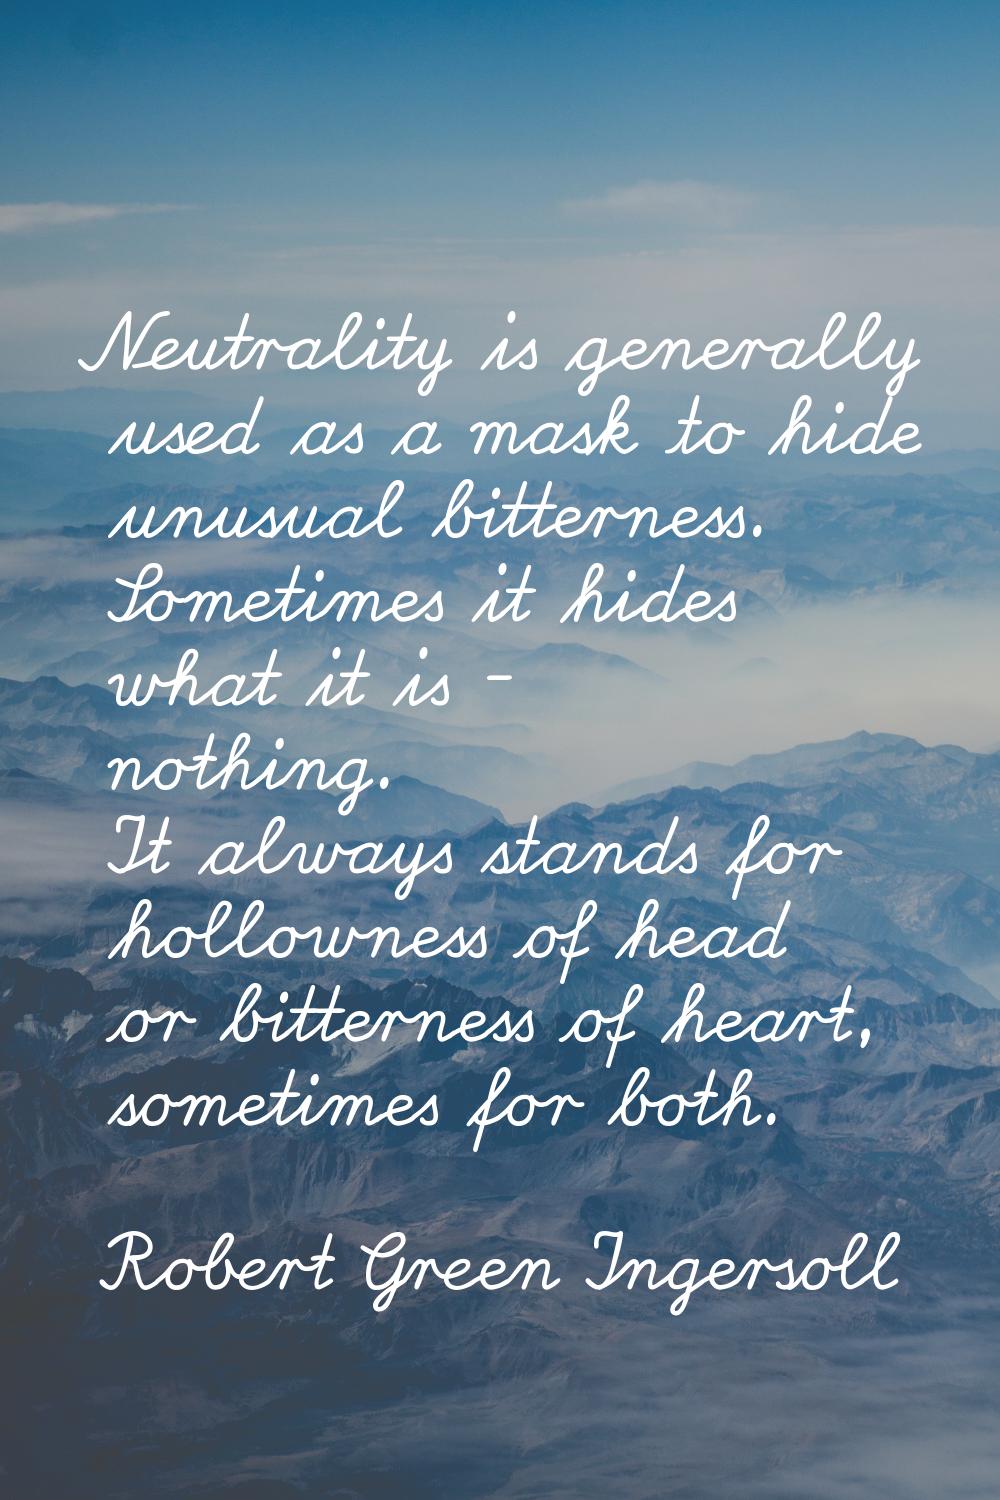 Neutrality is generally used as a mask to hide unusual bitterness. Sometimes it hides what it is - 